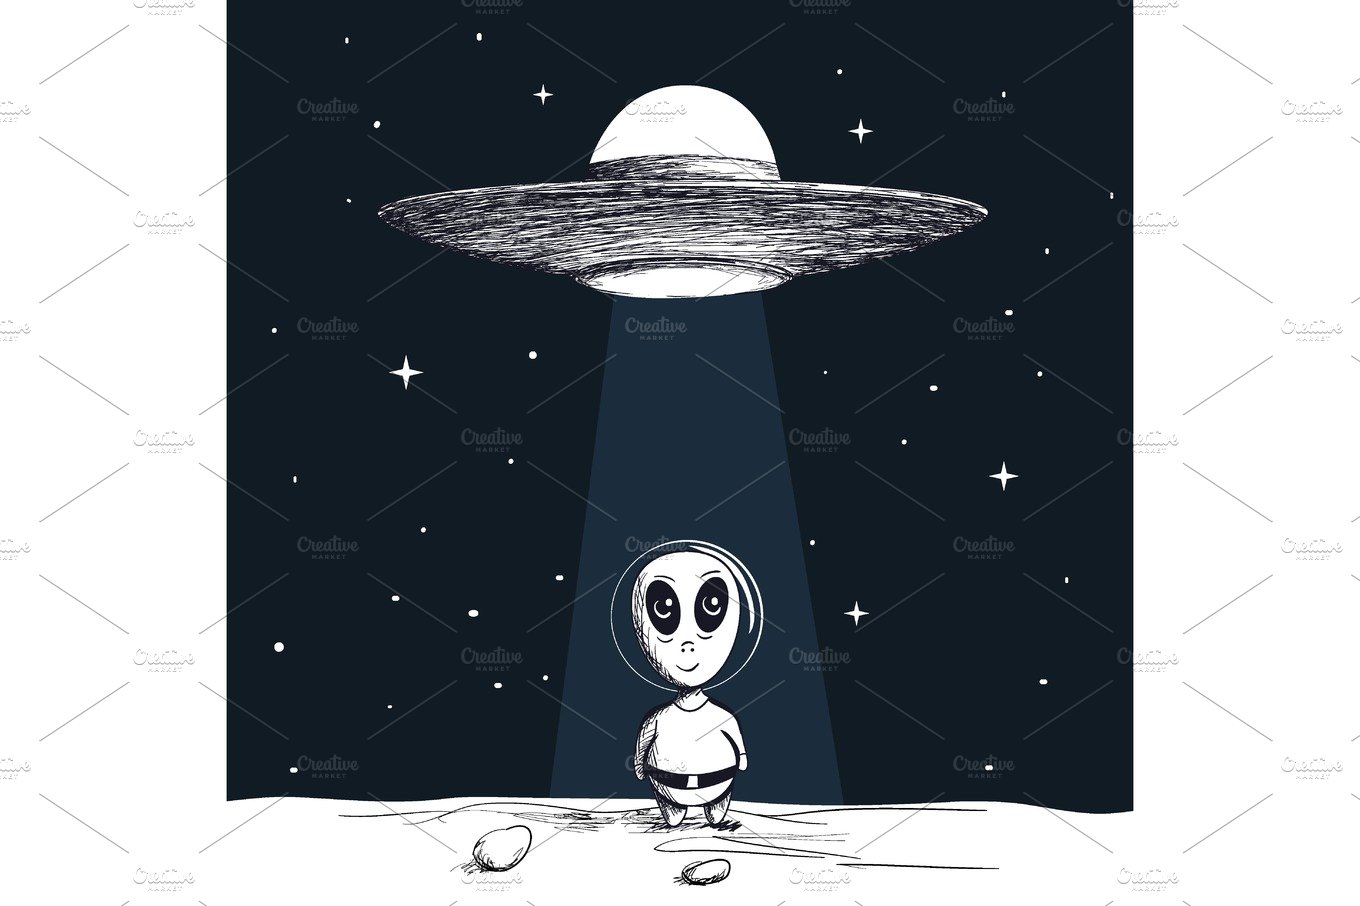 The arrival of an alien from UFO cover image.